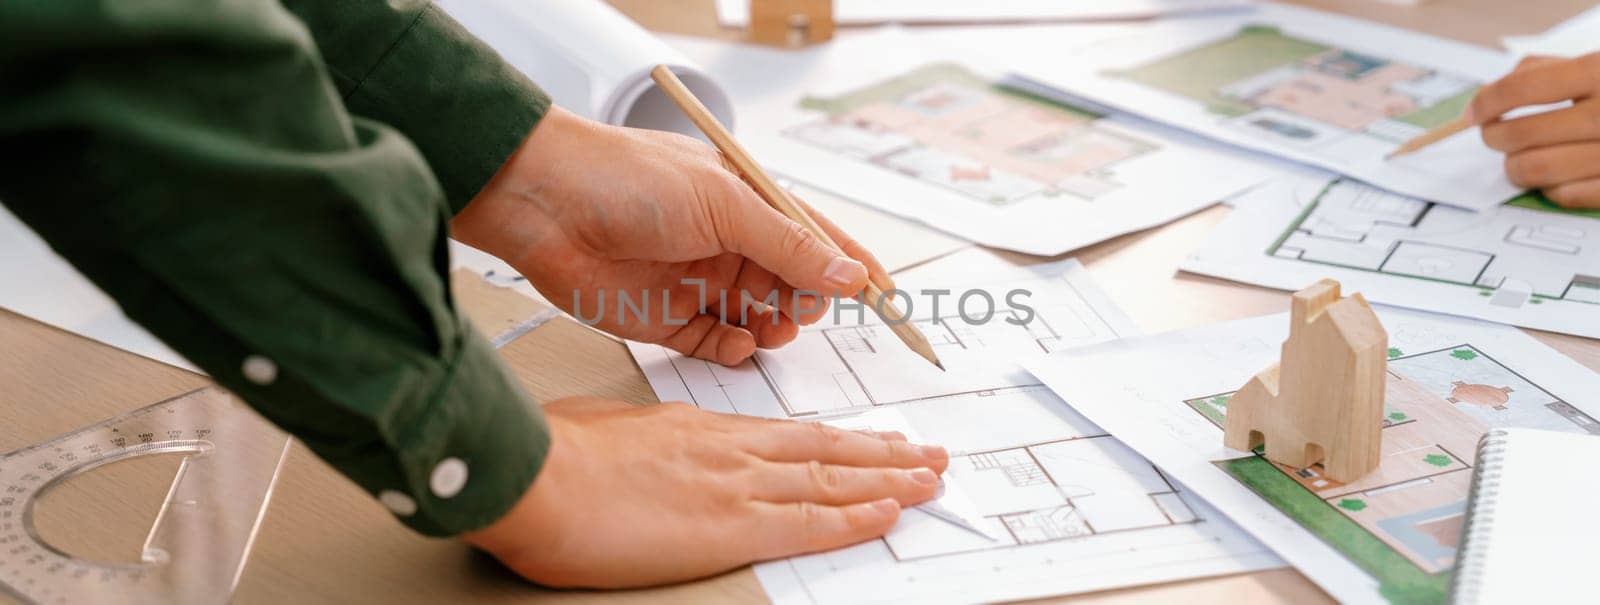 Professional engineer team discussion about house design on meeting table with architectural equipment and blueprint scatter around at modern office. Focus on hand. Closeup. Delineation.